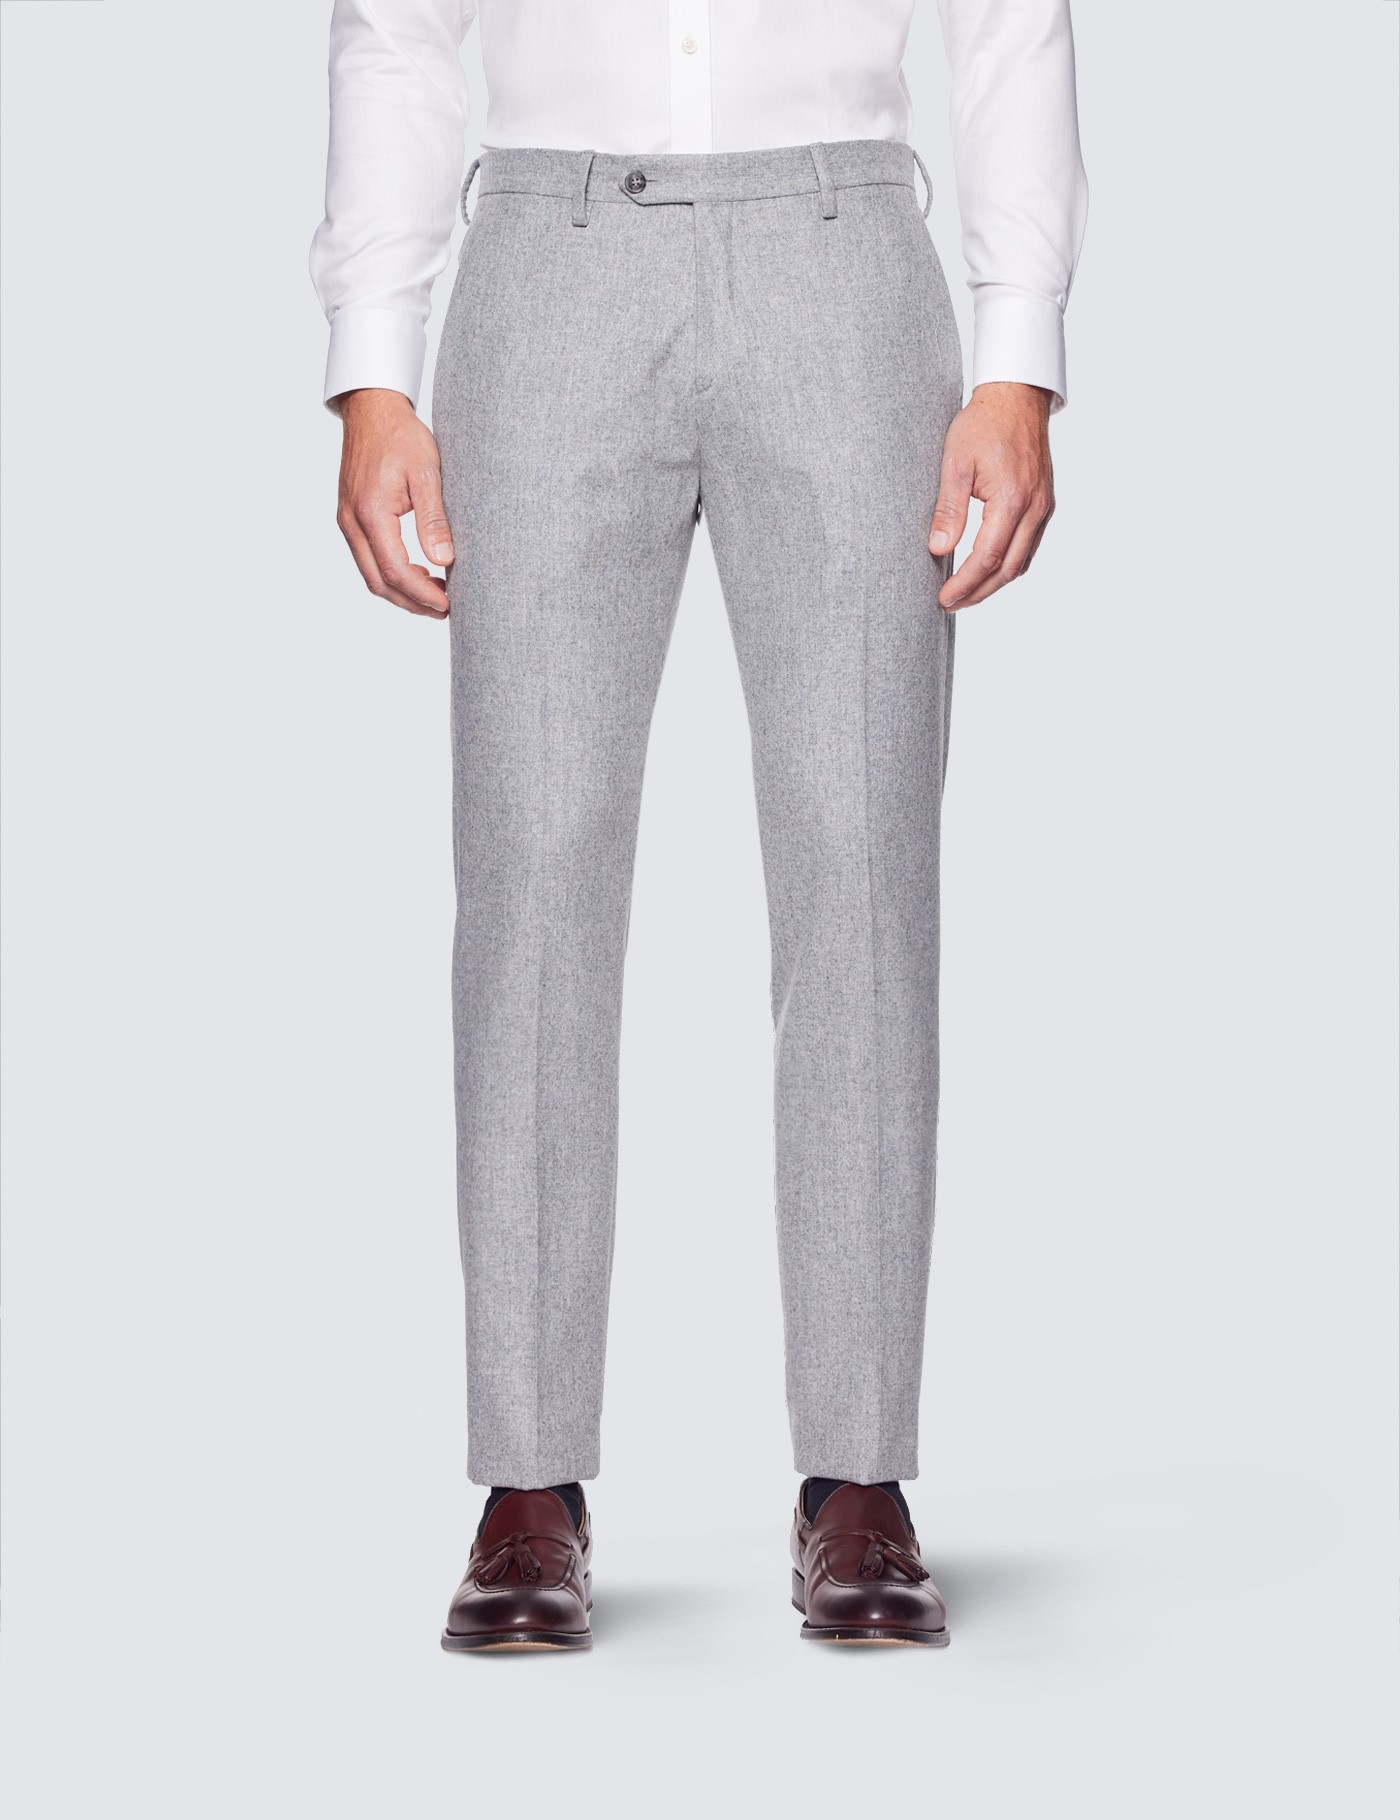 MEN'S LT GREY SOLID TAPERED FIT TROUSER – JDC Store Online Shopping